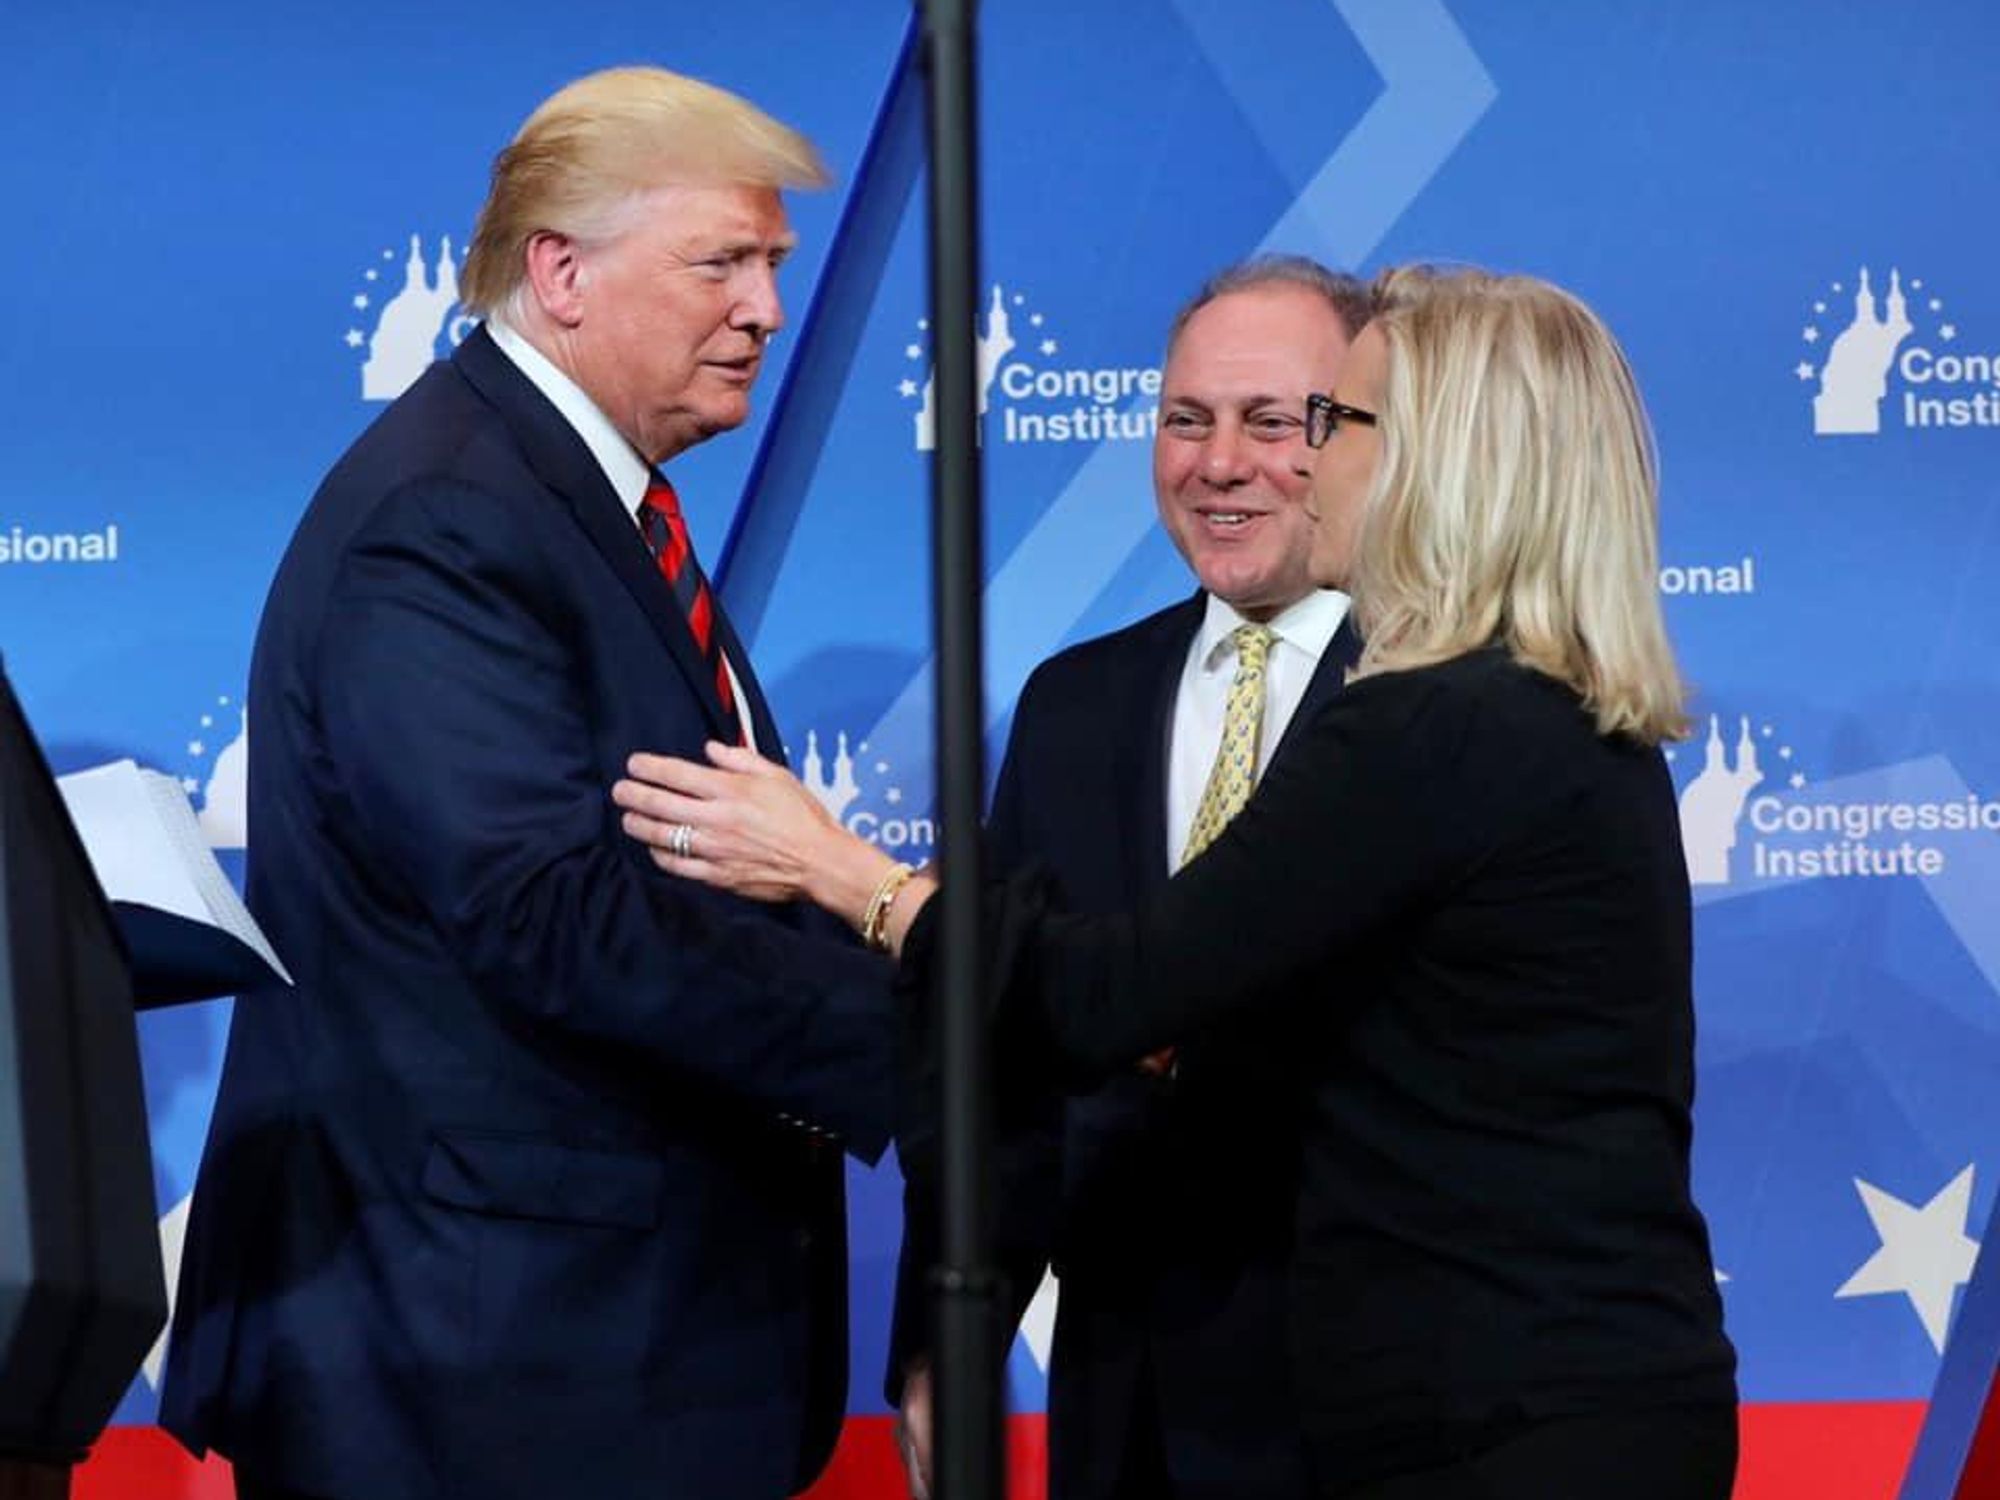 Rep. Liz Cheney, right, shaking hands with former President Trump.